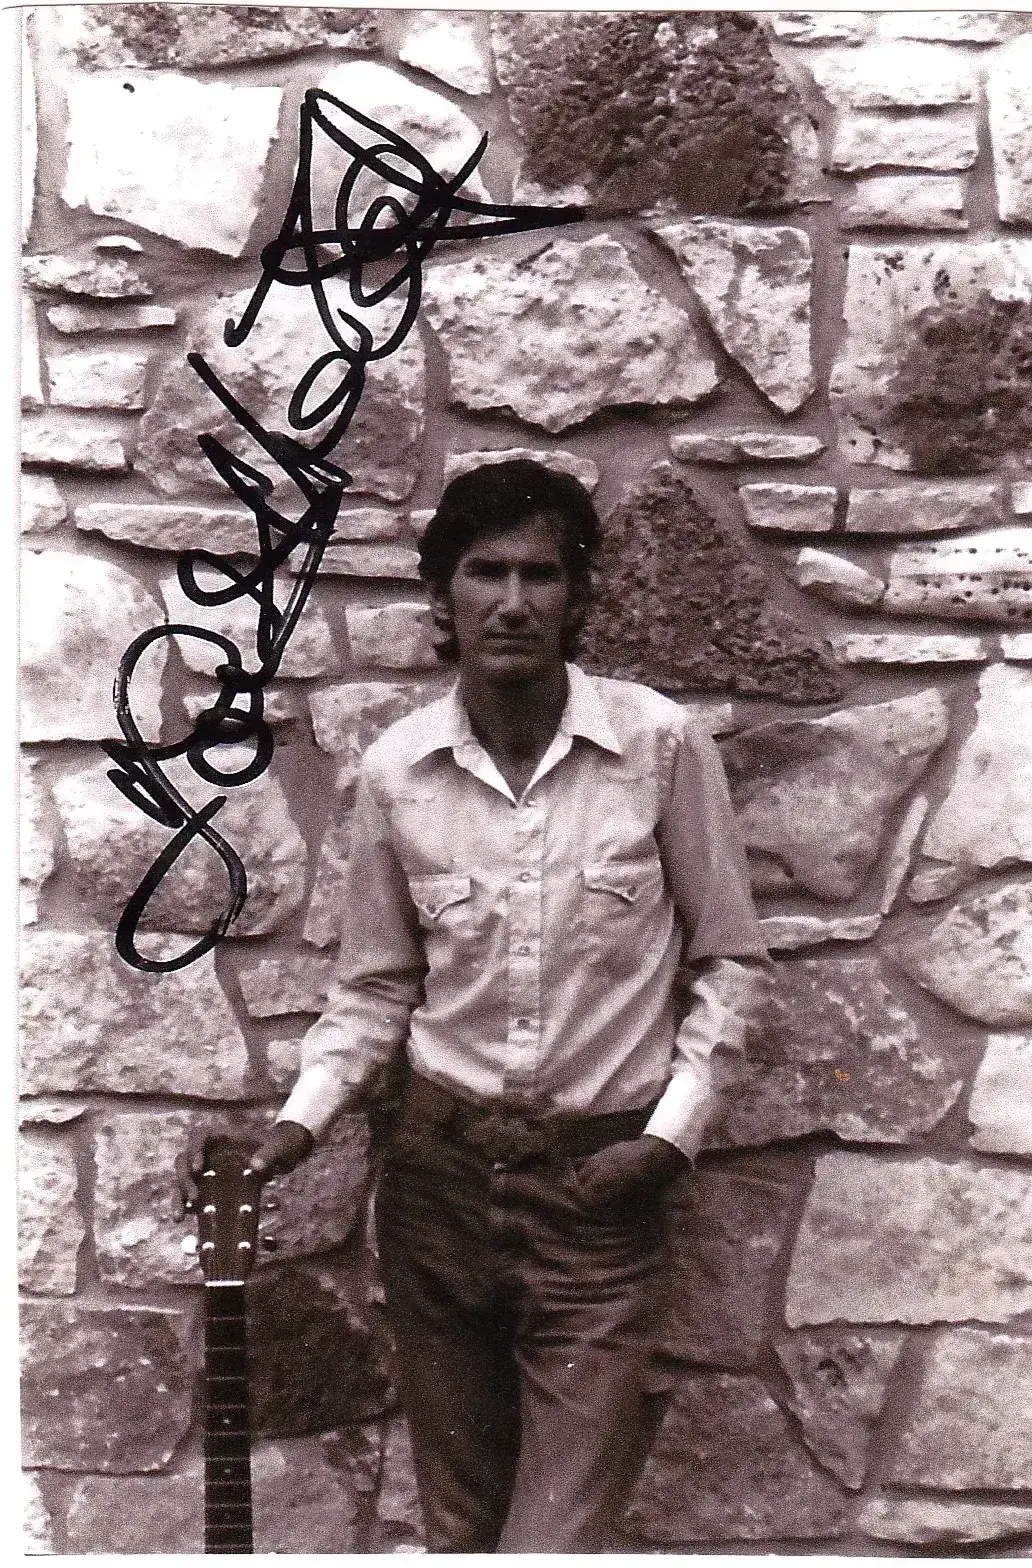 A man standing in front of a stone wall holding a guitar.